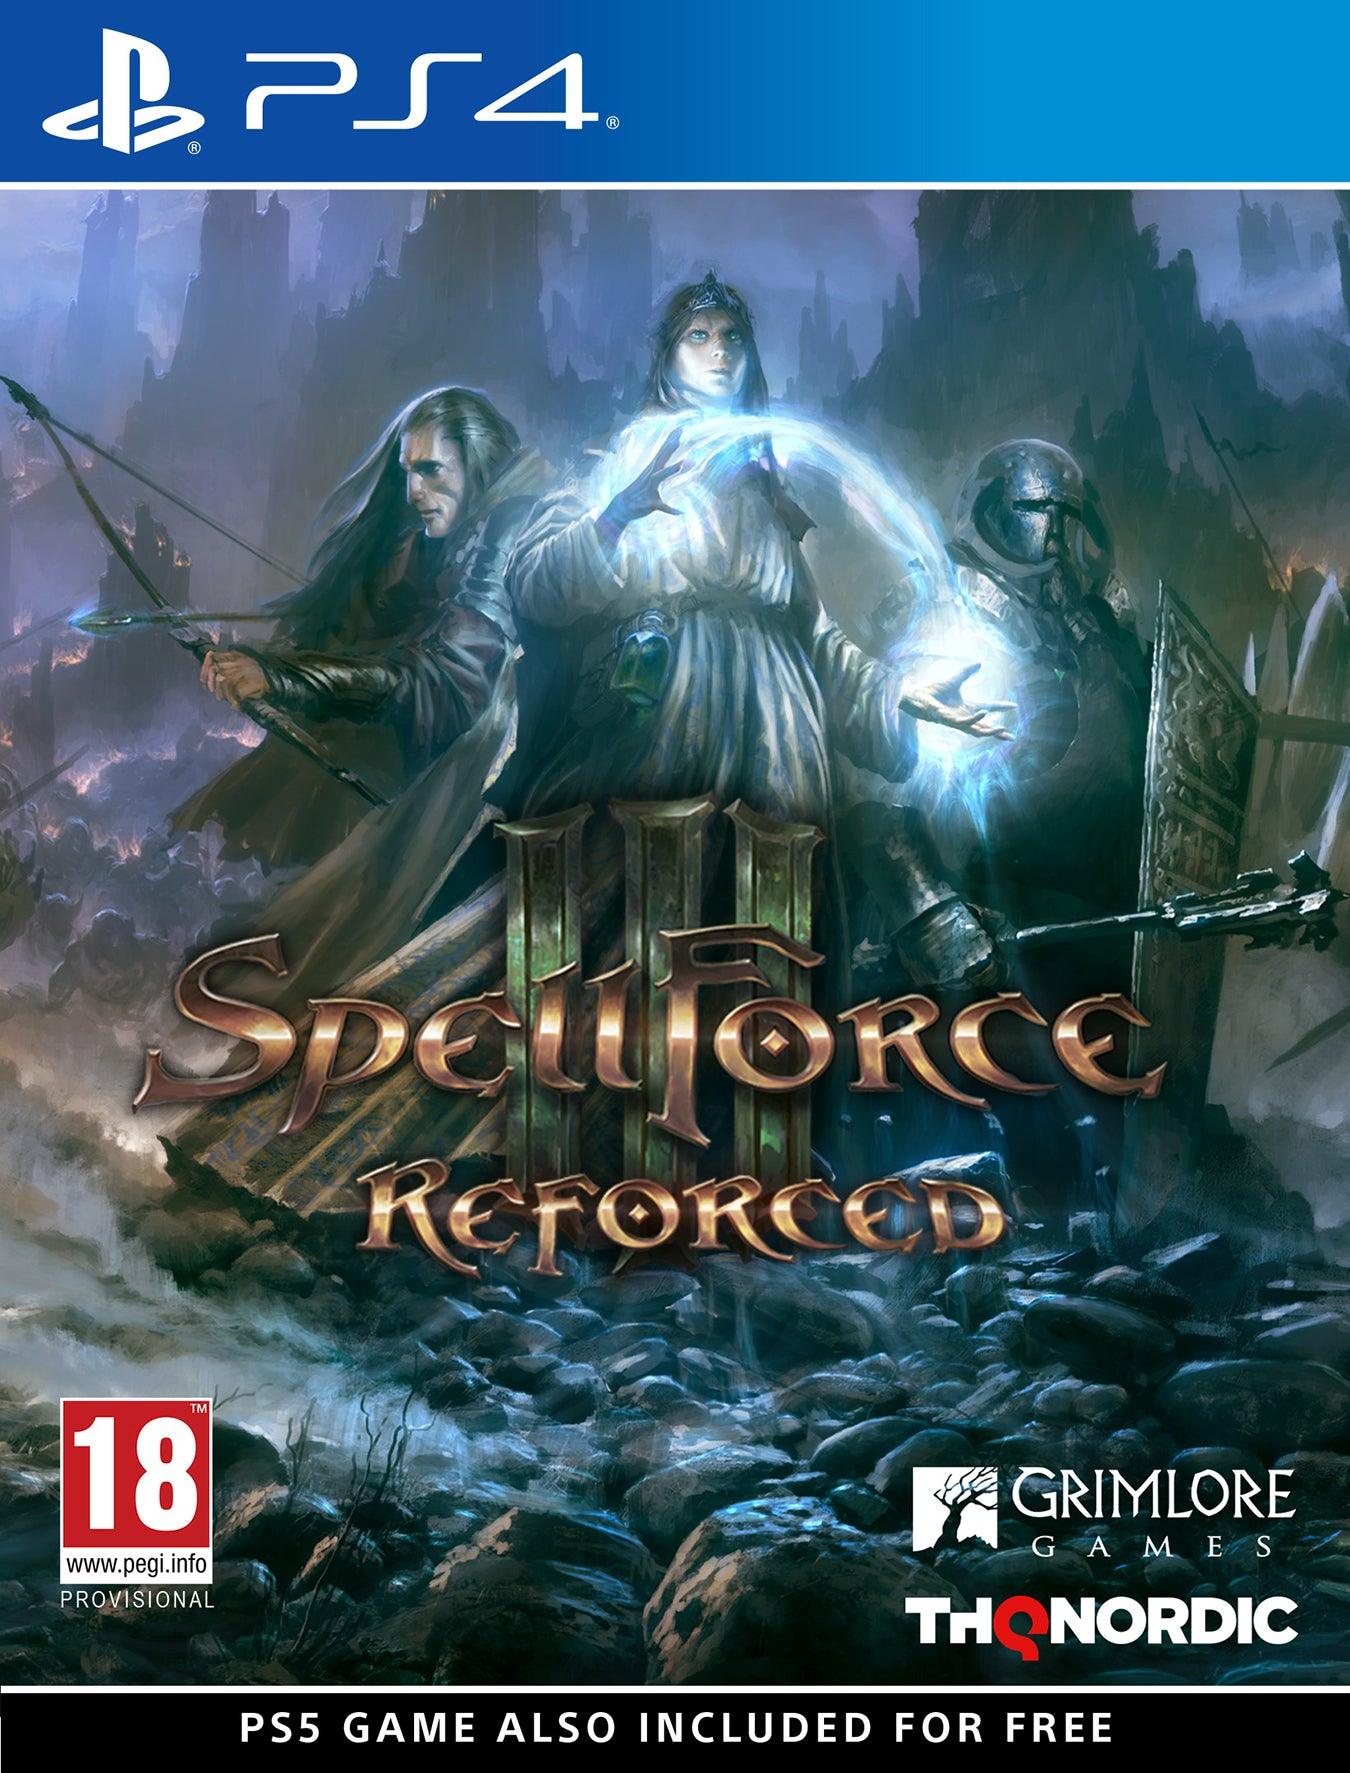 Spellforce 3 Reforced - Want a New Gadget